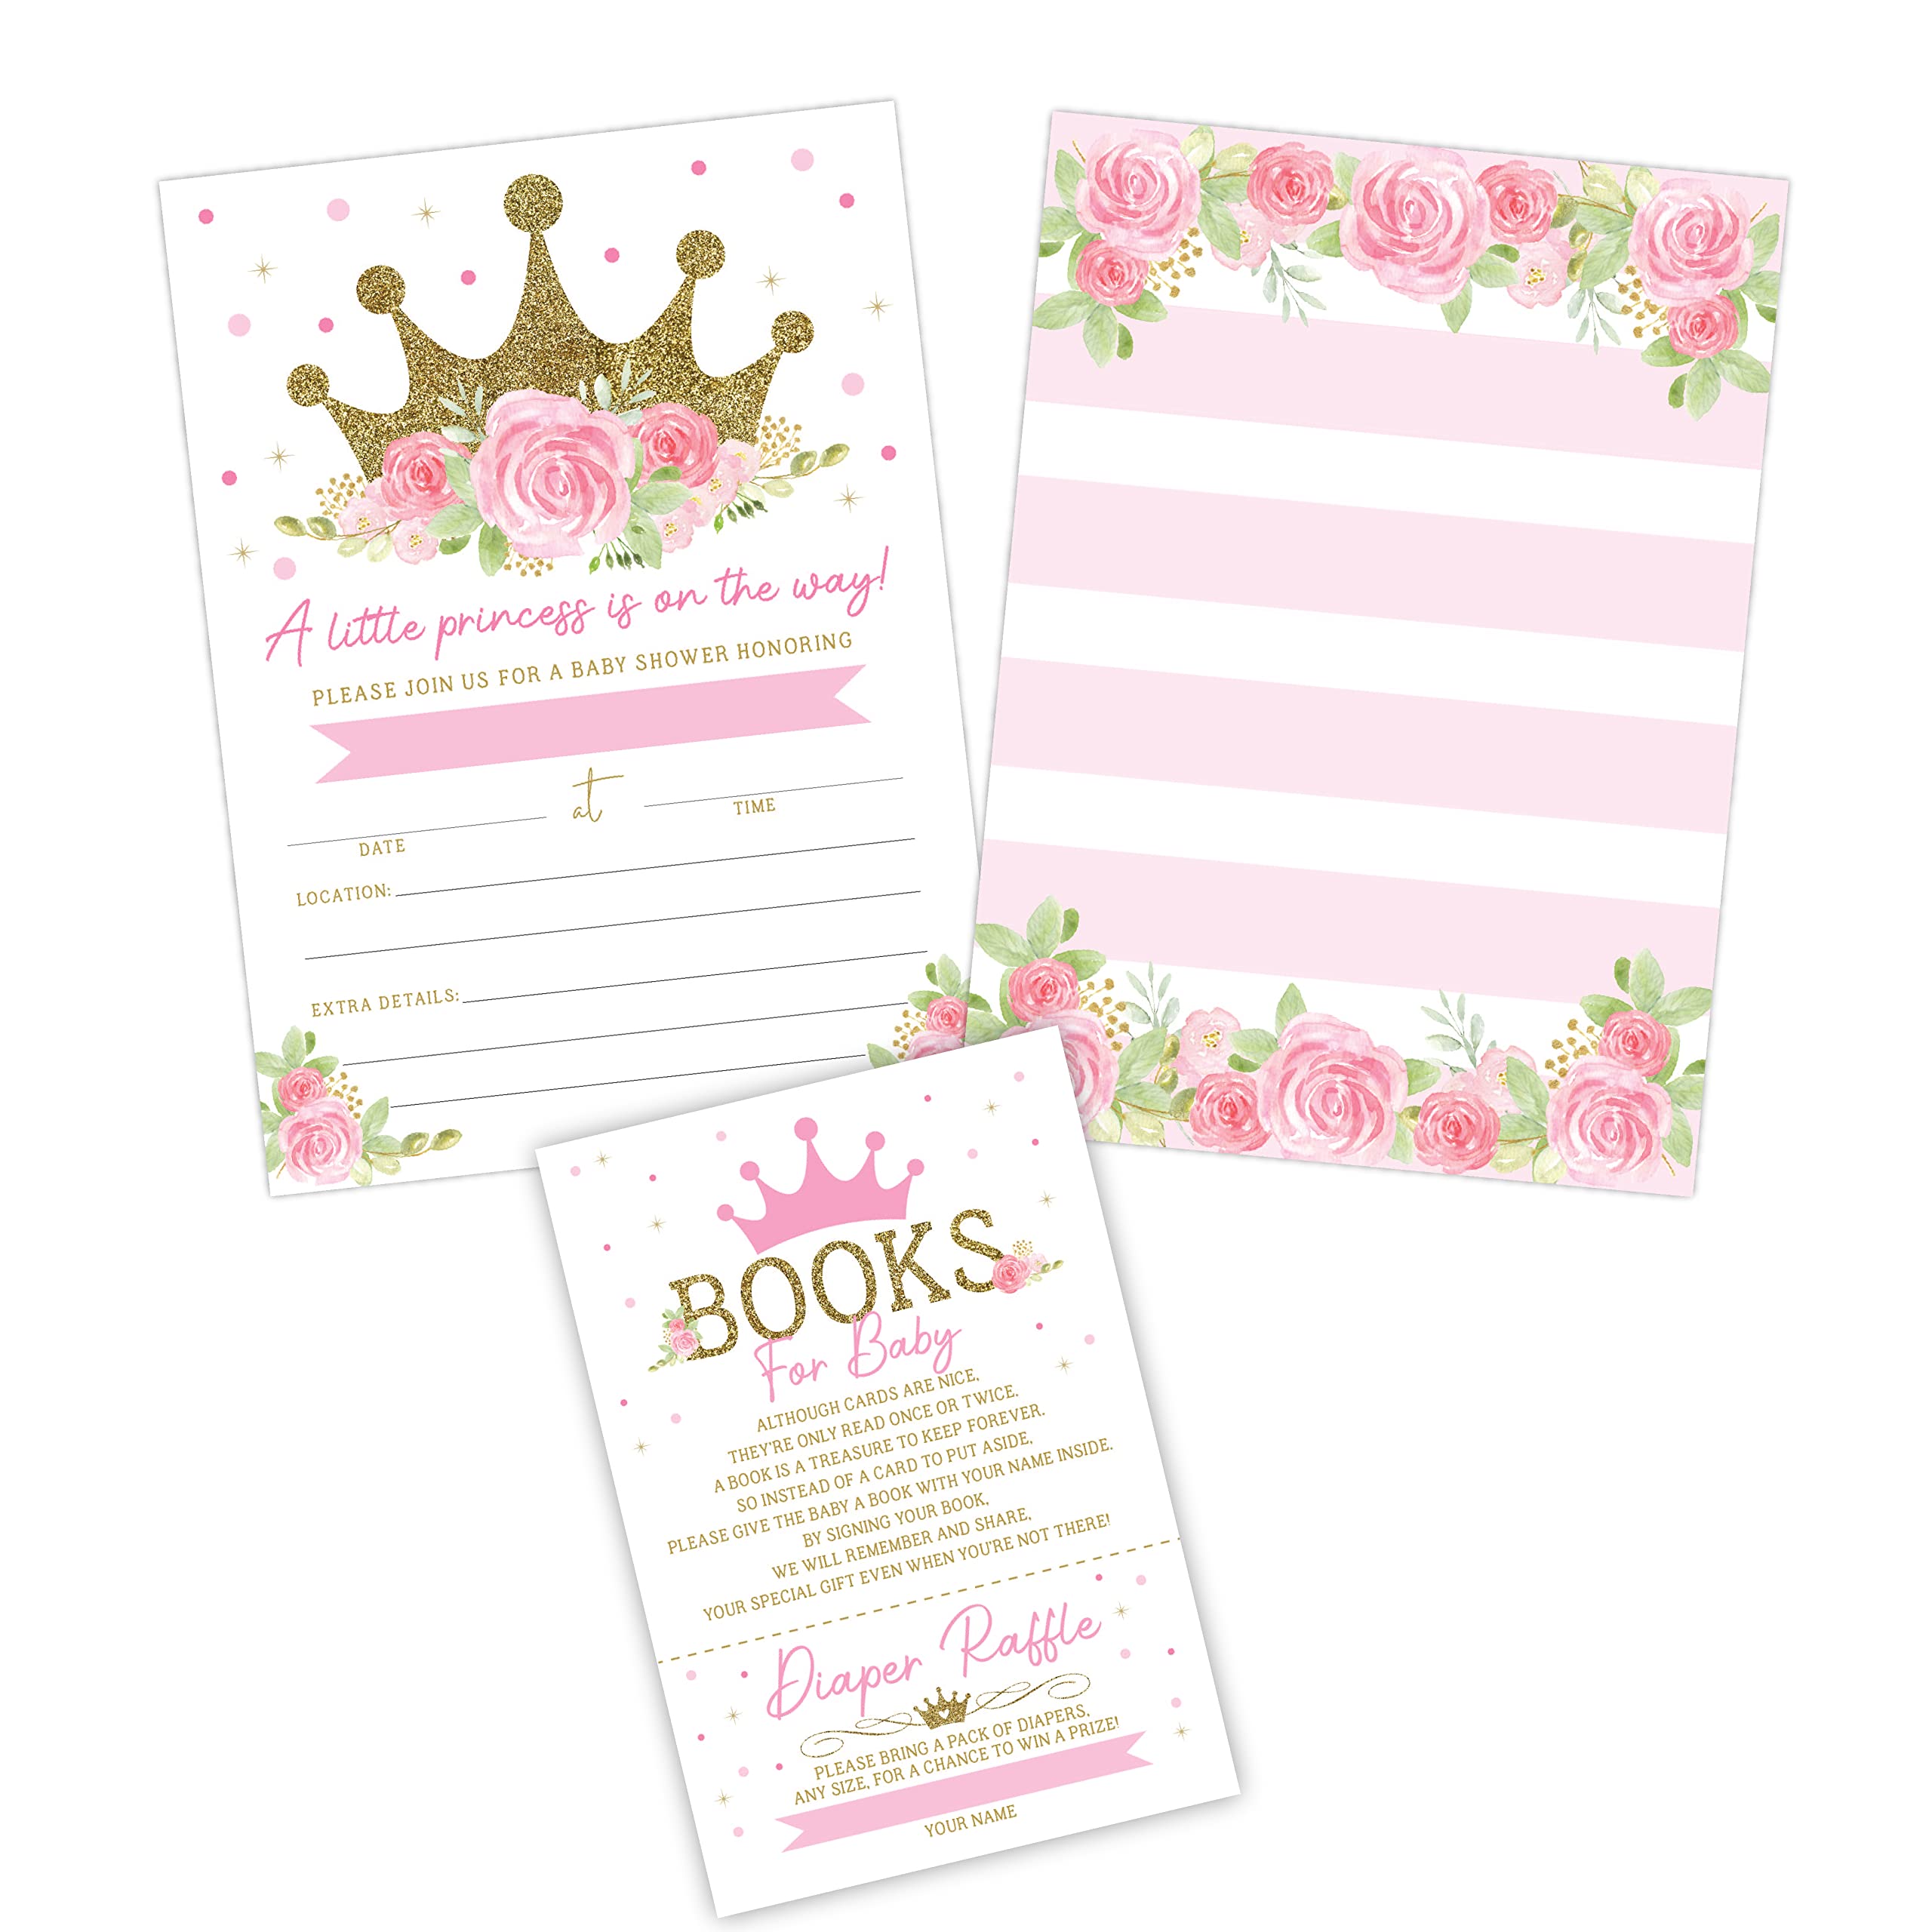 Princess Baby Shower Invitations with Book Request and Diaper Raffle Card, Pink Baby Sprinkle, 20 Fill in Invites